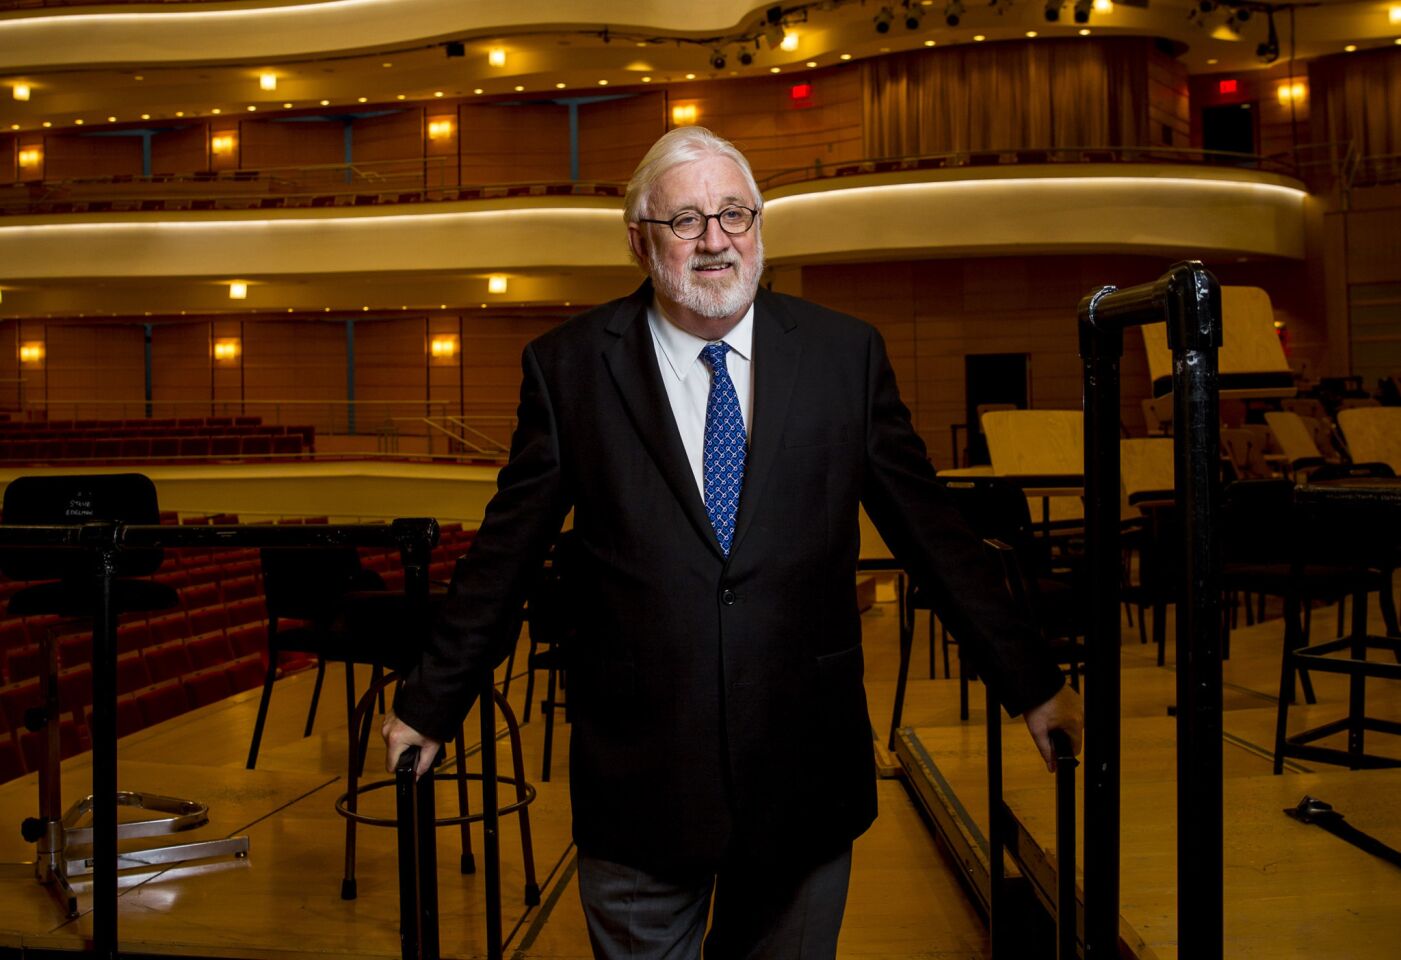 Dean Corey, classical music advocate, retired after 21 years as head of the Philharmonic Society in Orange County. His last show was May 15.